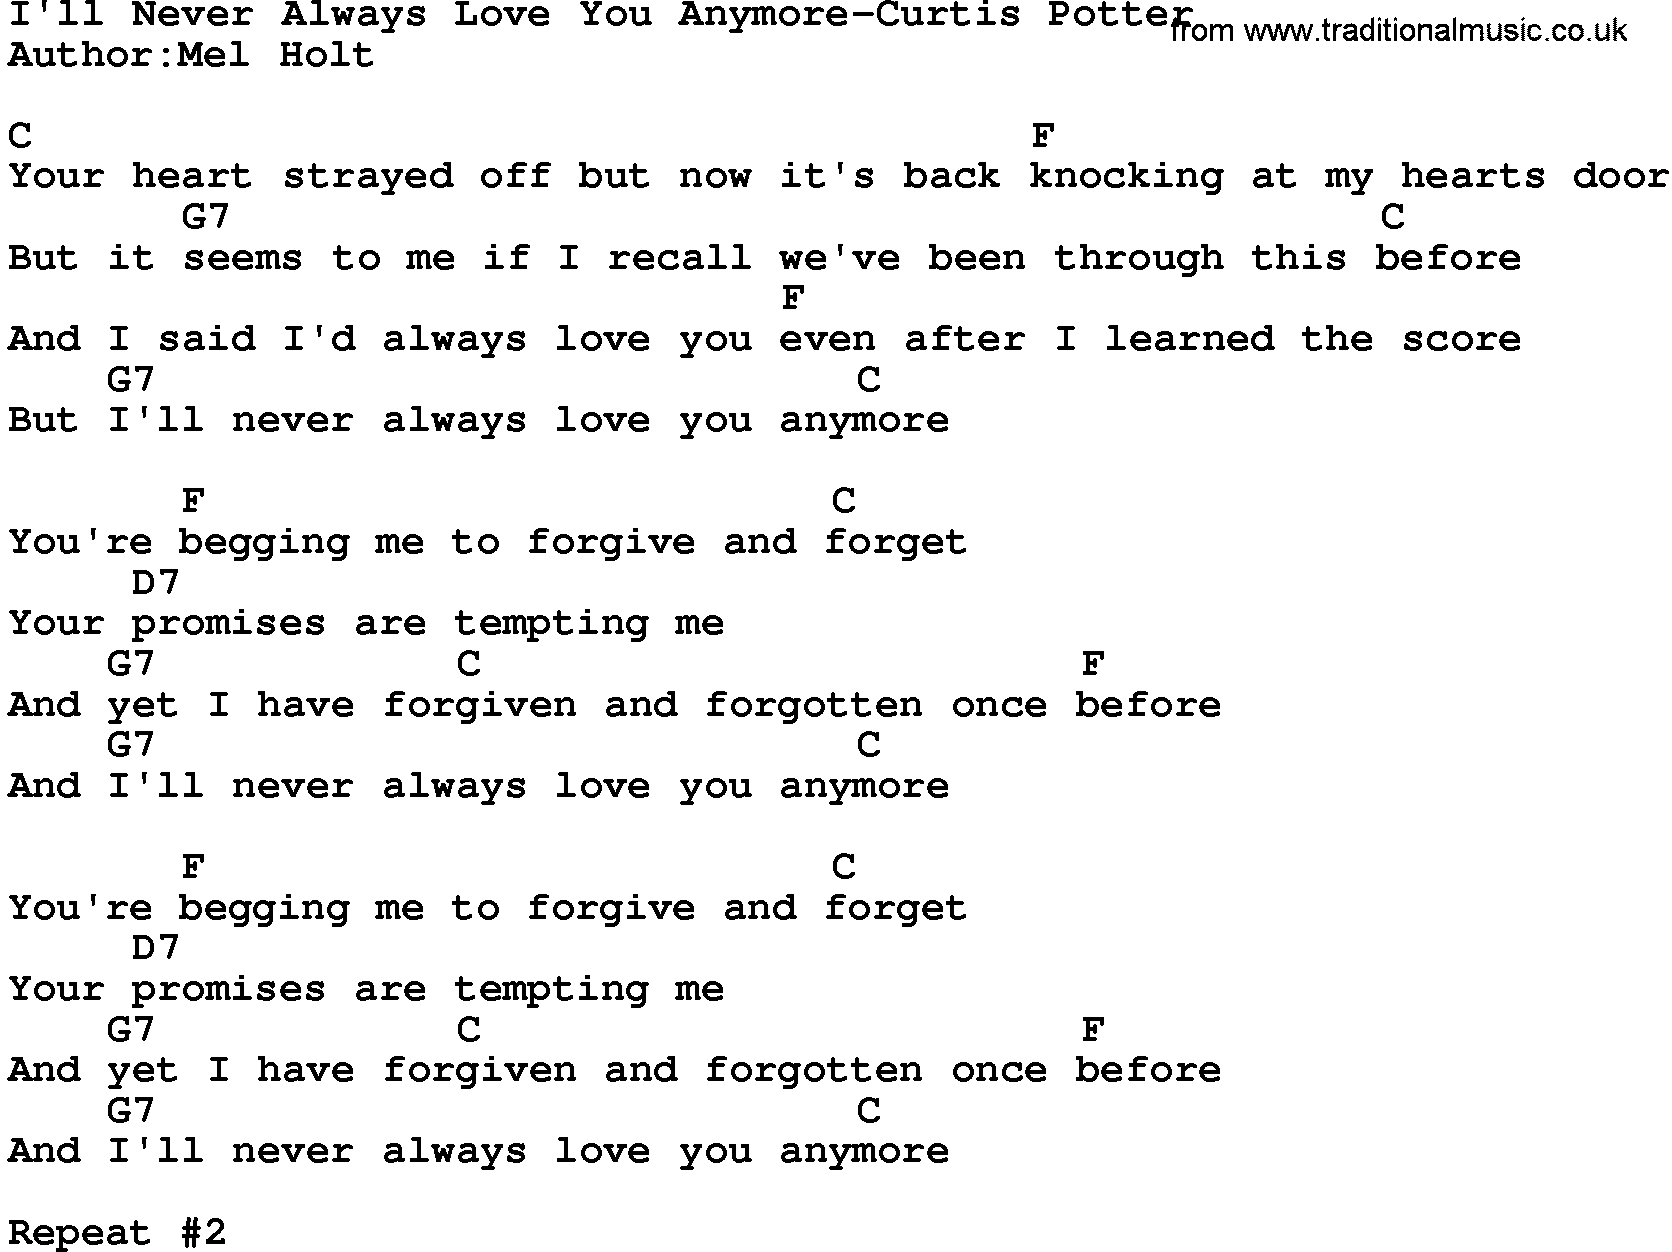 Country music song: I'll Never Always Love You Anymore-Curtis Potter lyrics and chords